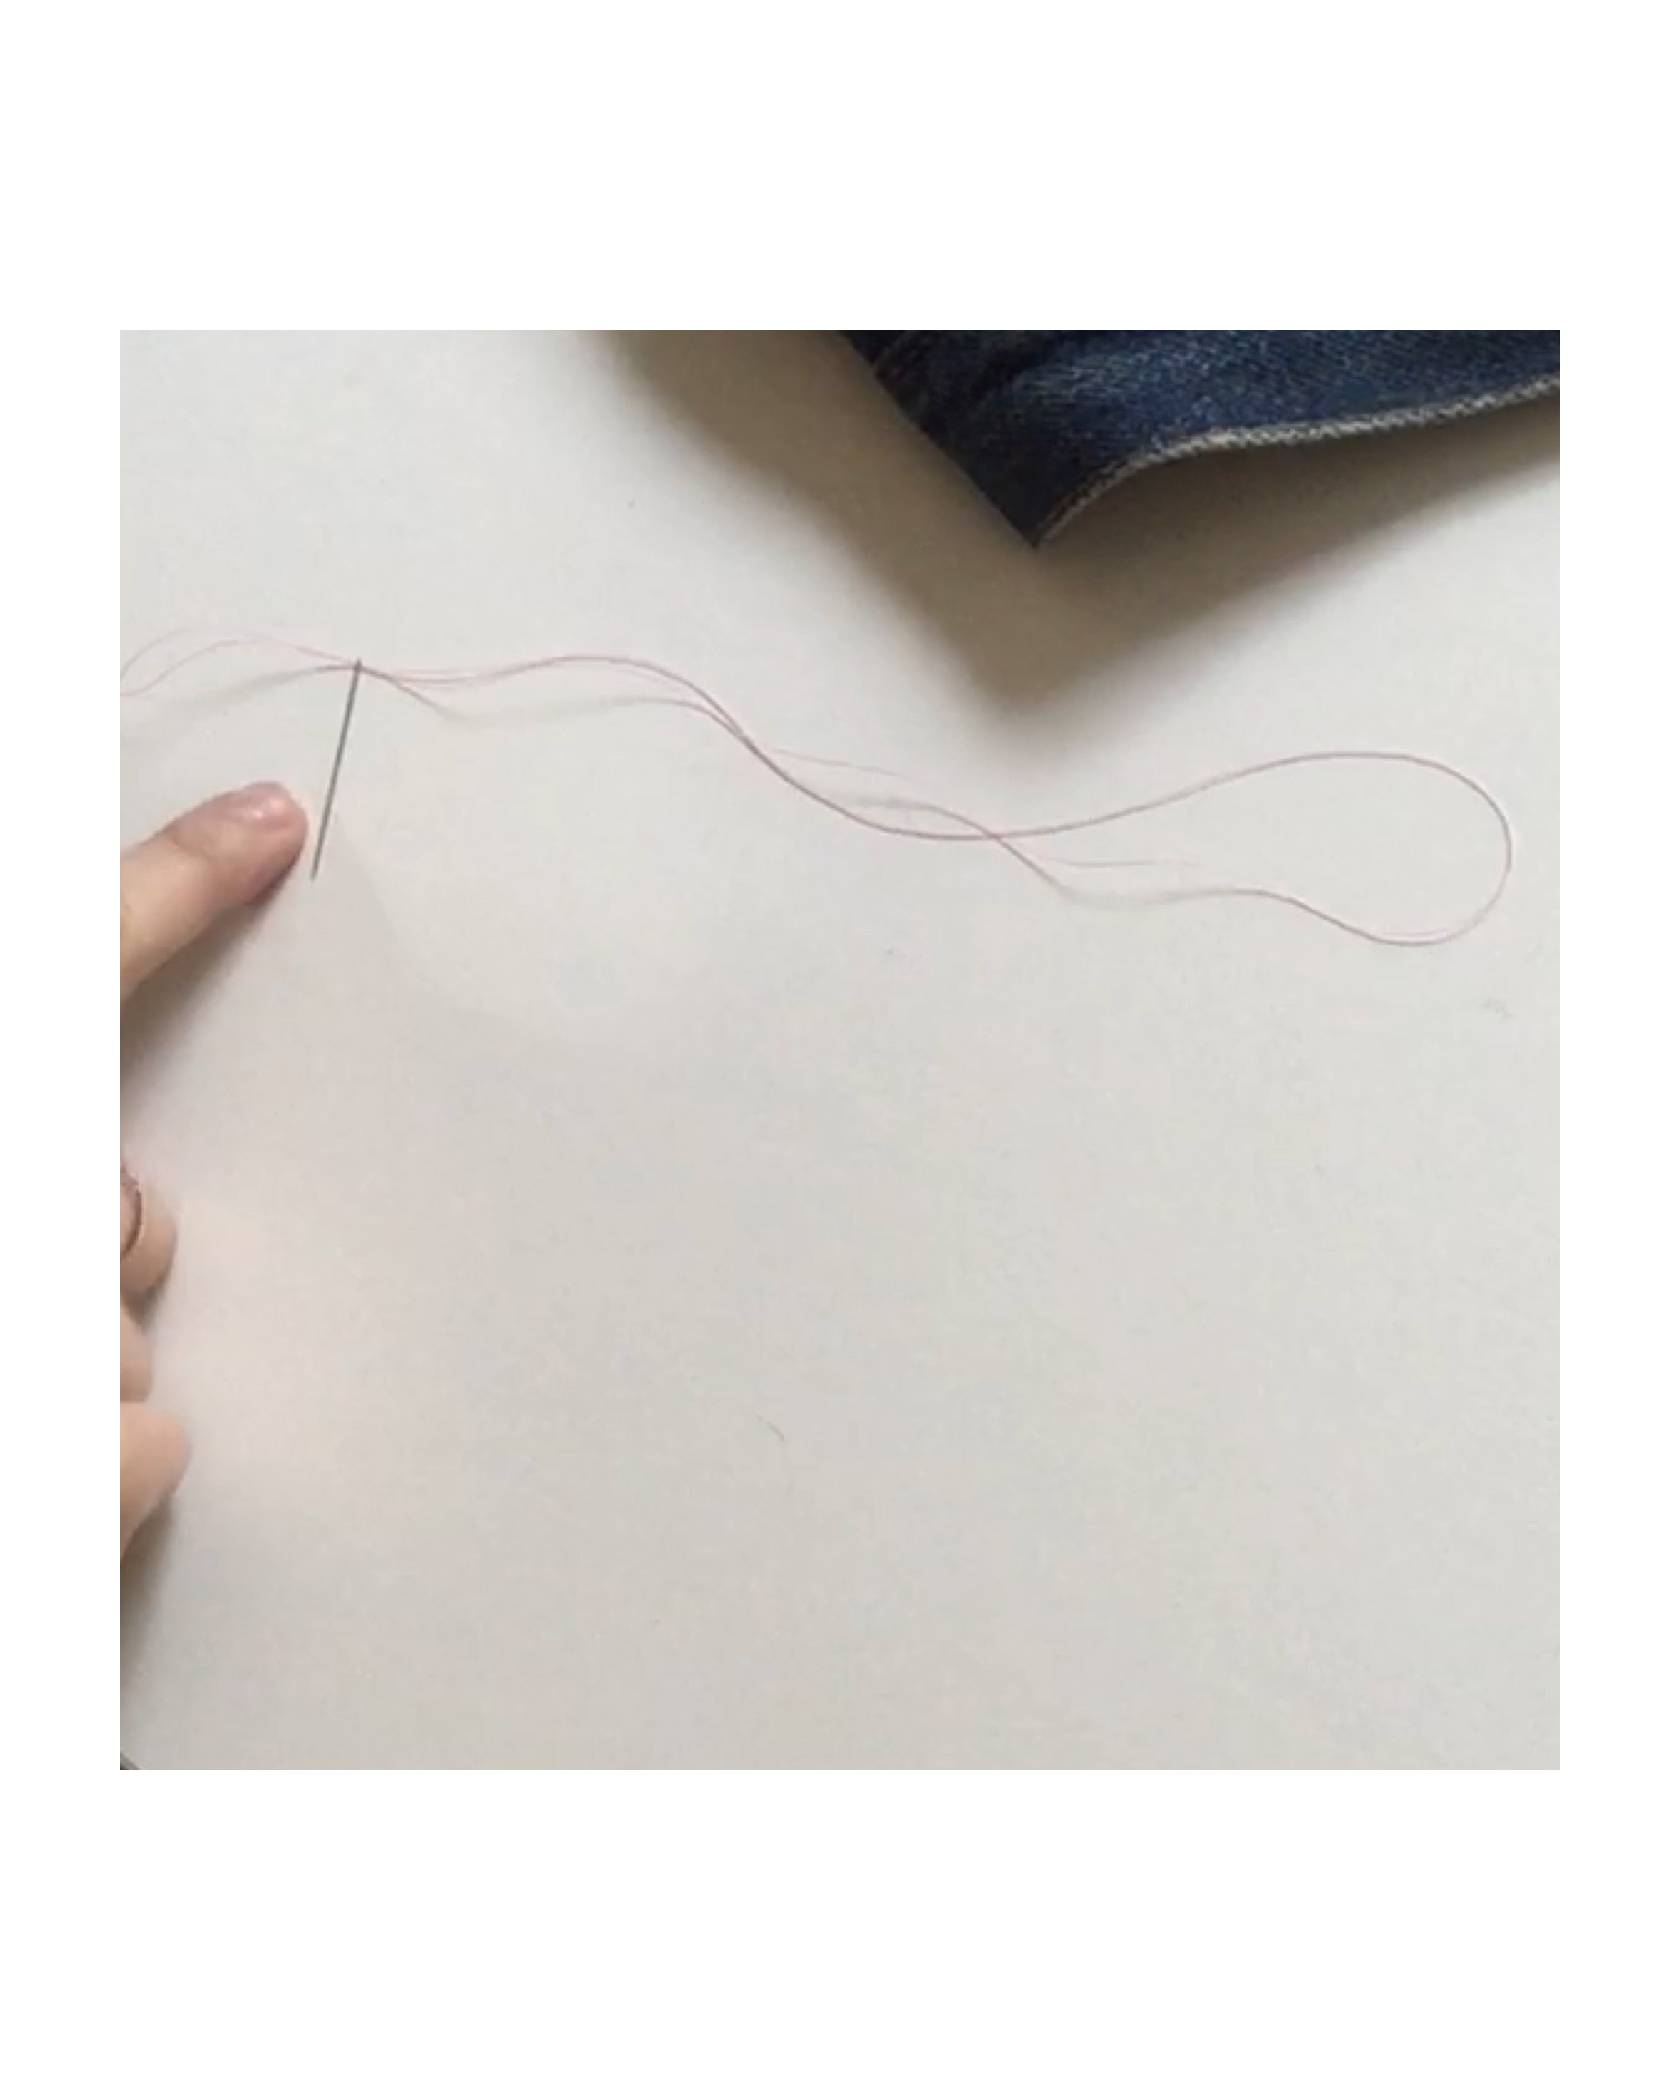 Image of a needle and thread to show how to thread the needle through and leaving a loop on one end.